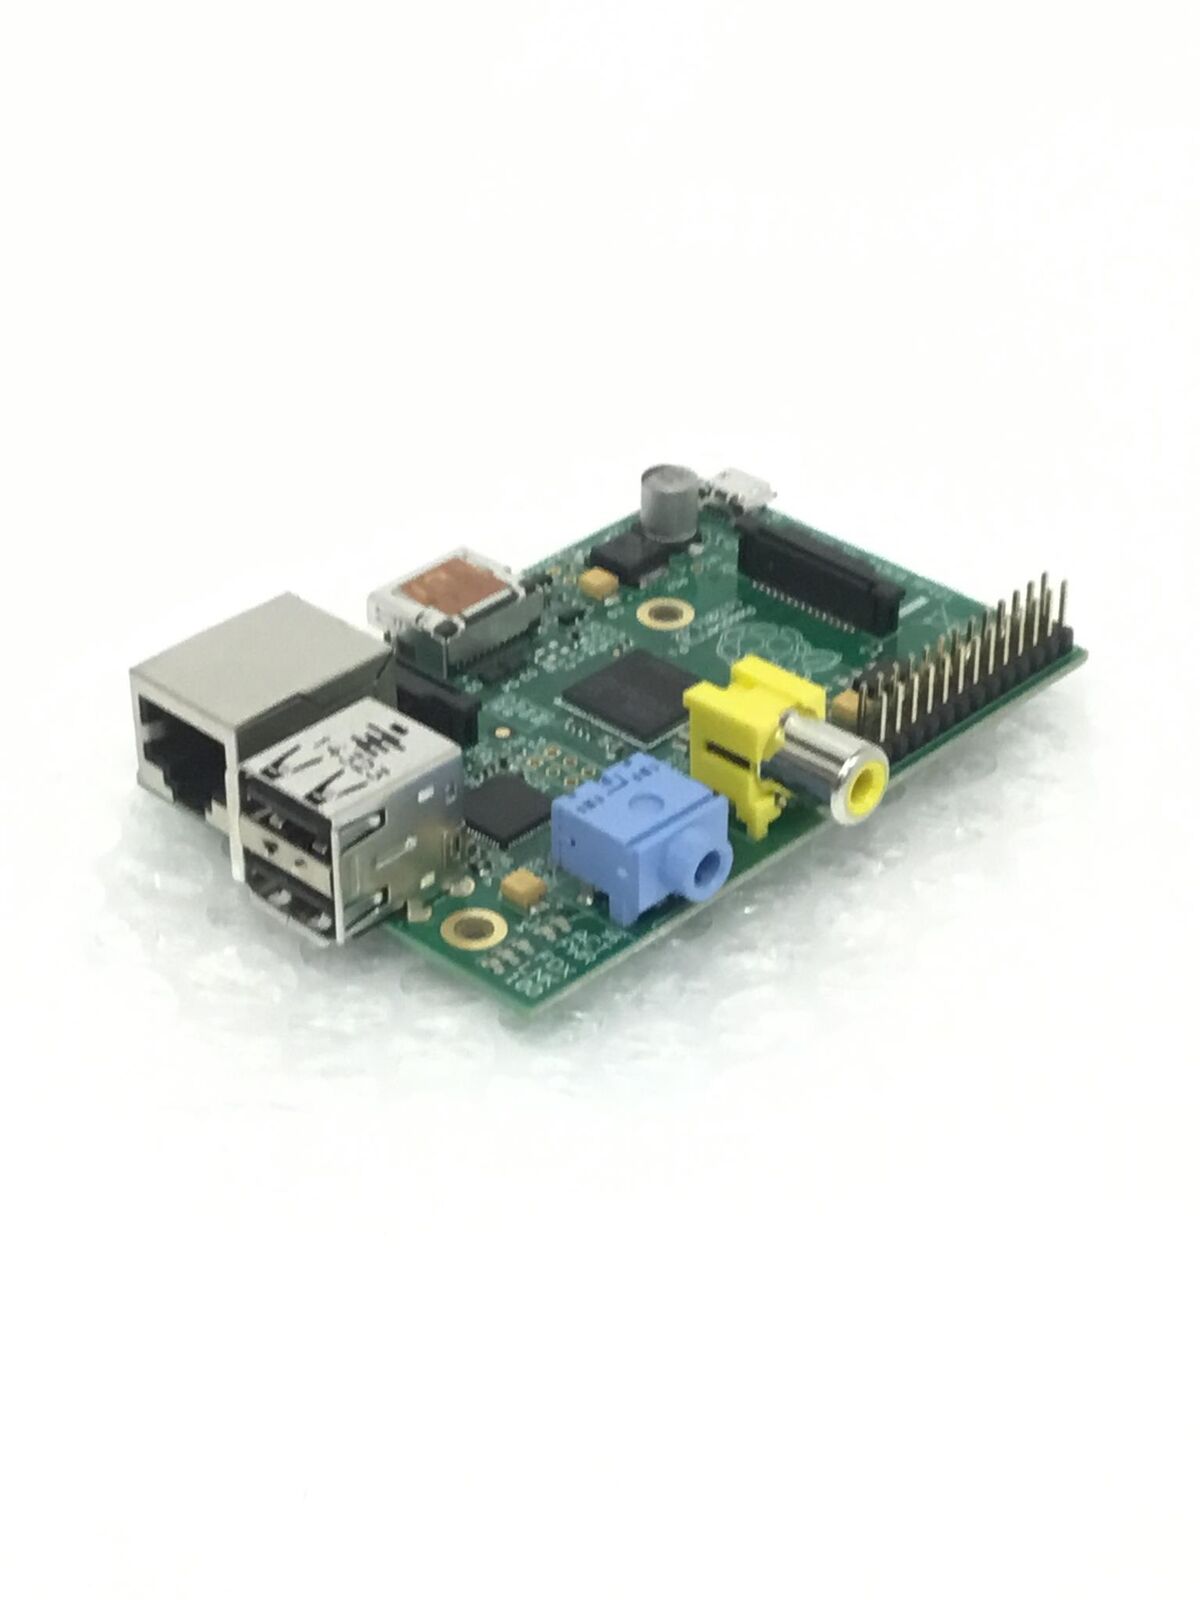 Raspberry P1 2011.12 Computer Board with HDMI, 2xUSB ports WORKING,QTY AVAILABLE